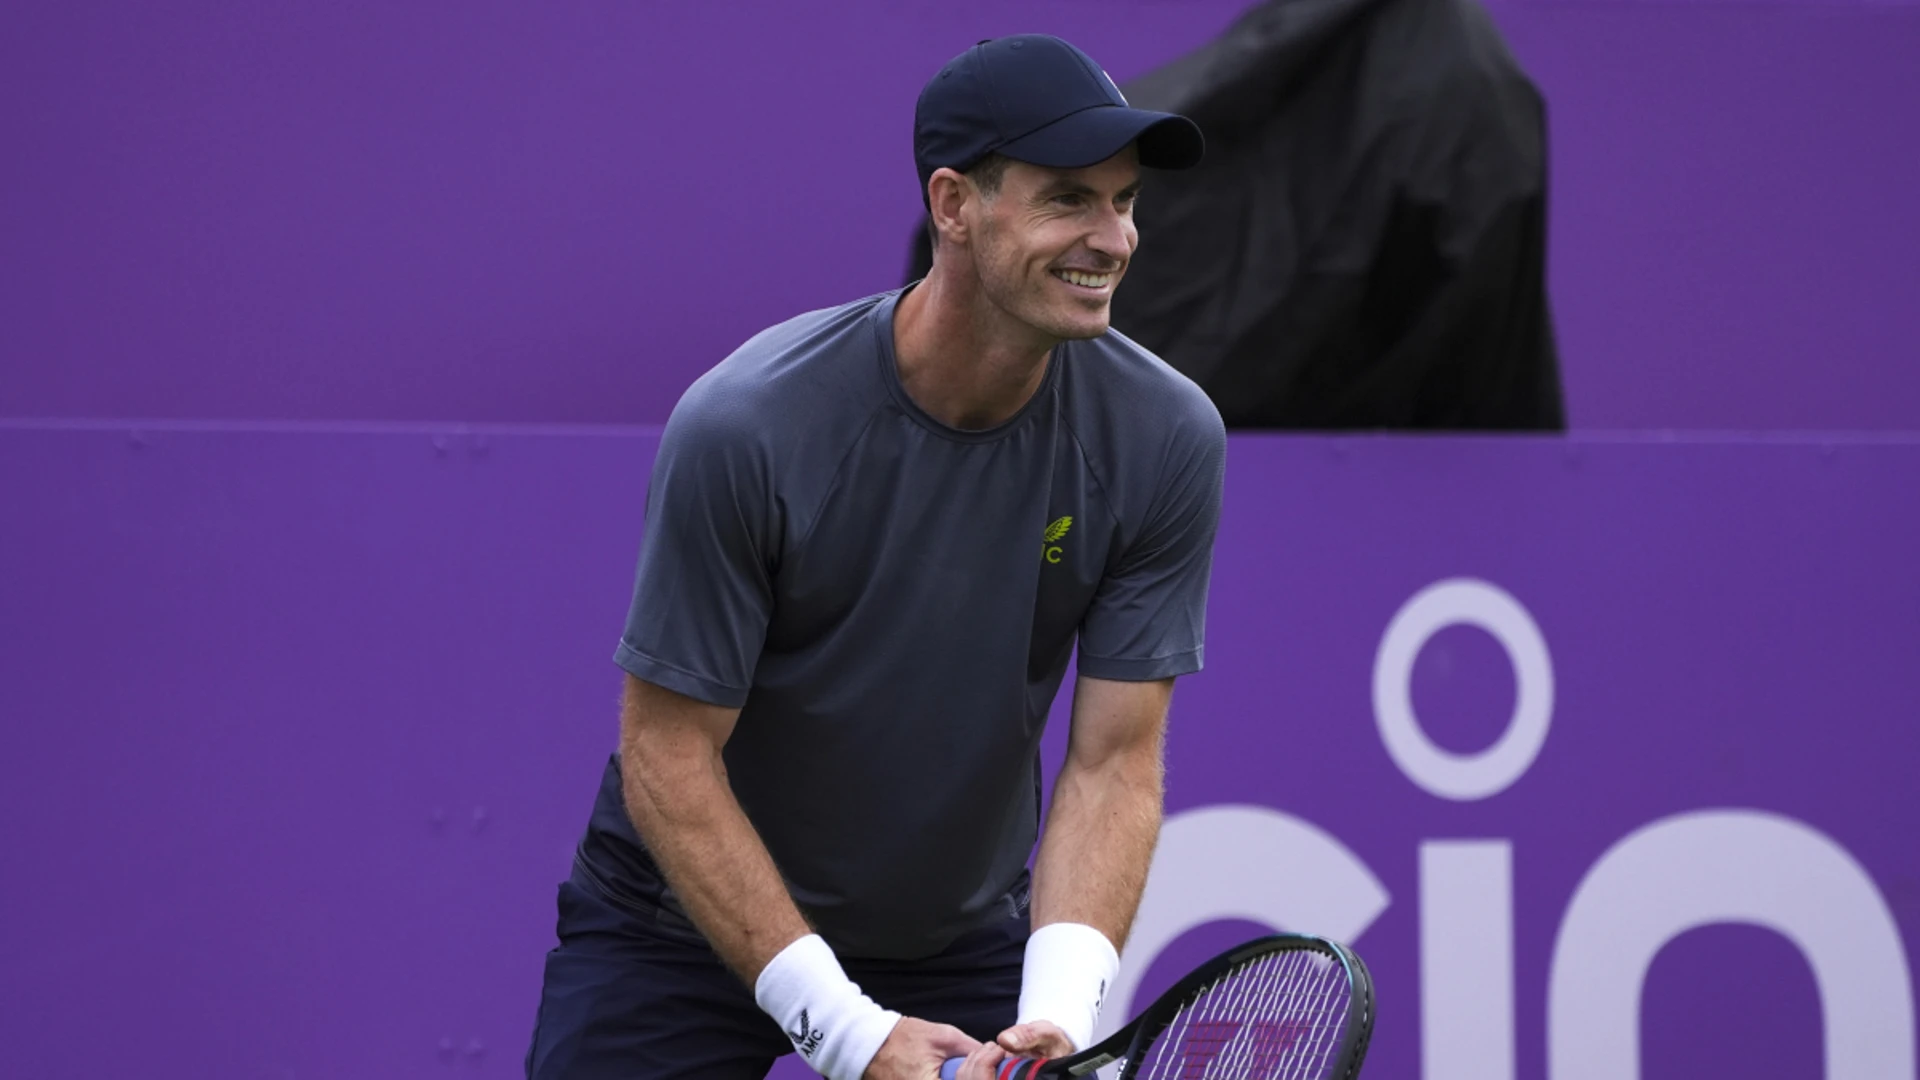 Bowing out at Wimbledon or Olympics would be fitting, Murray says